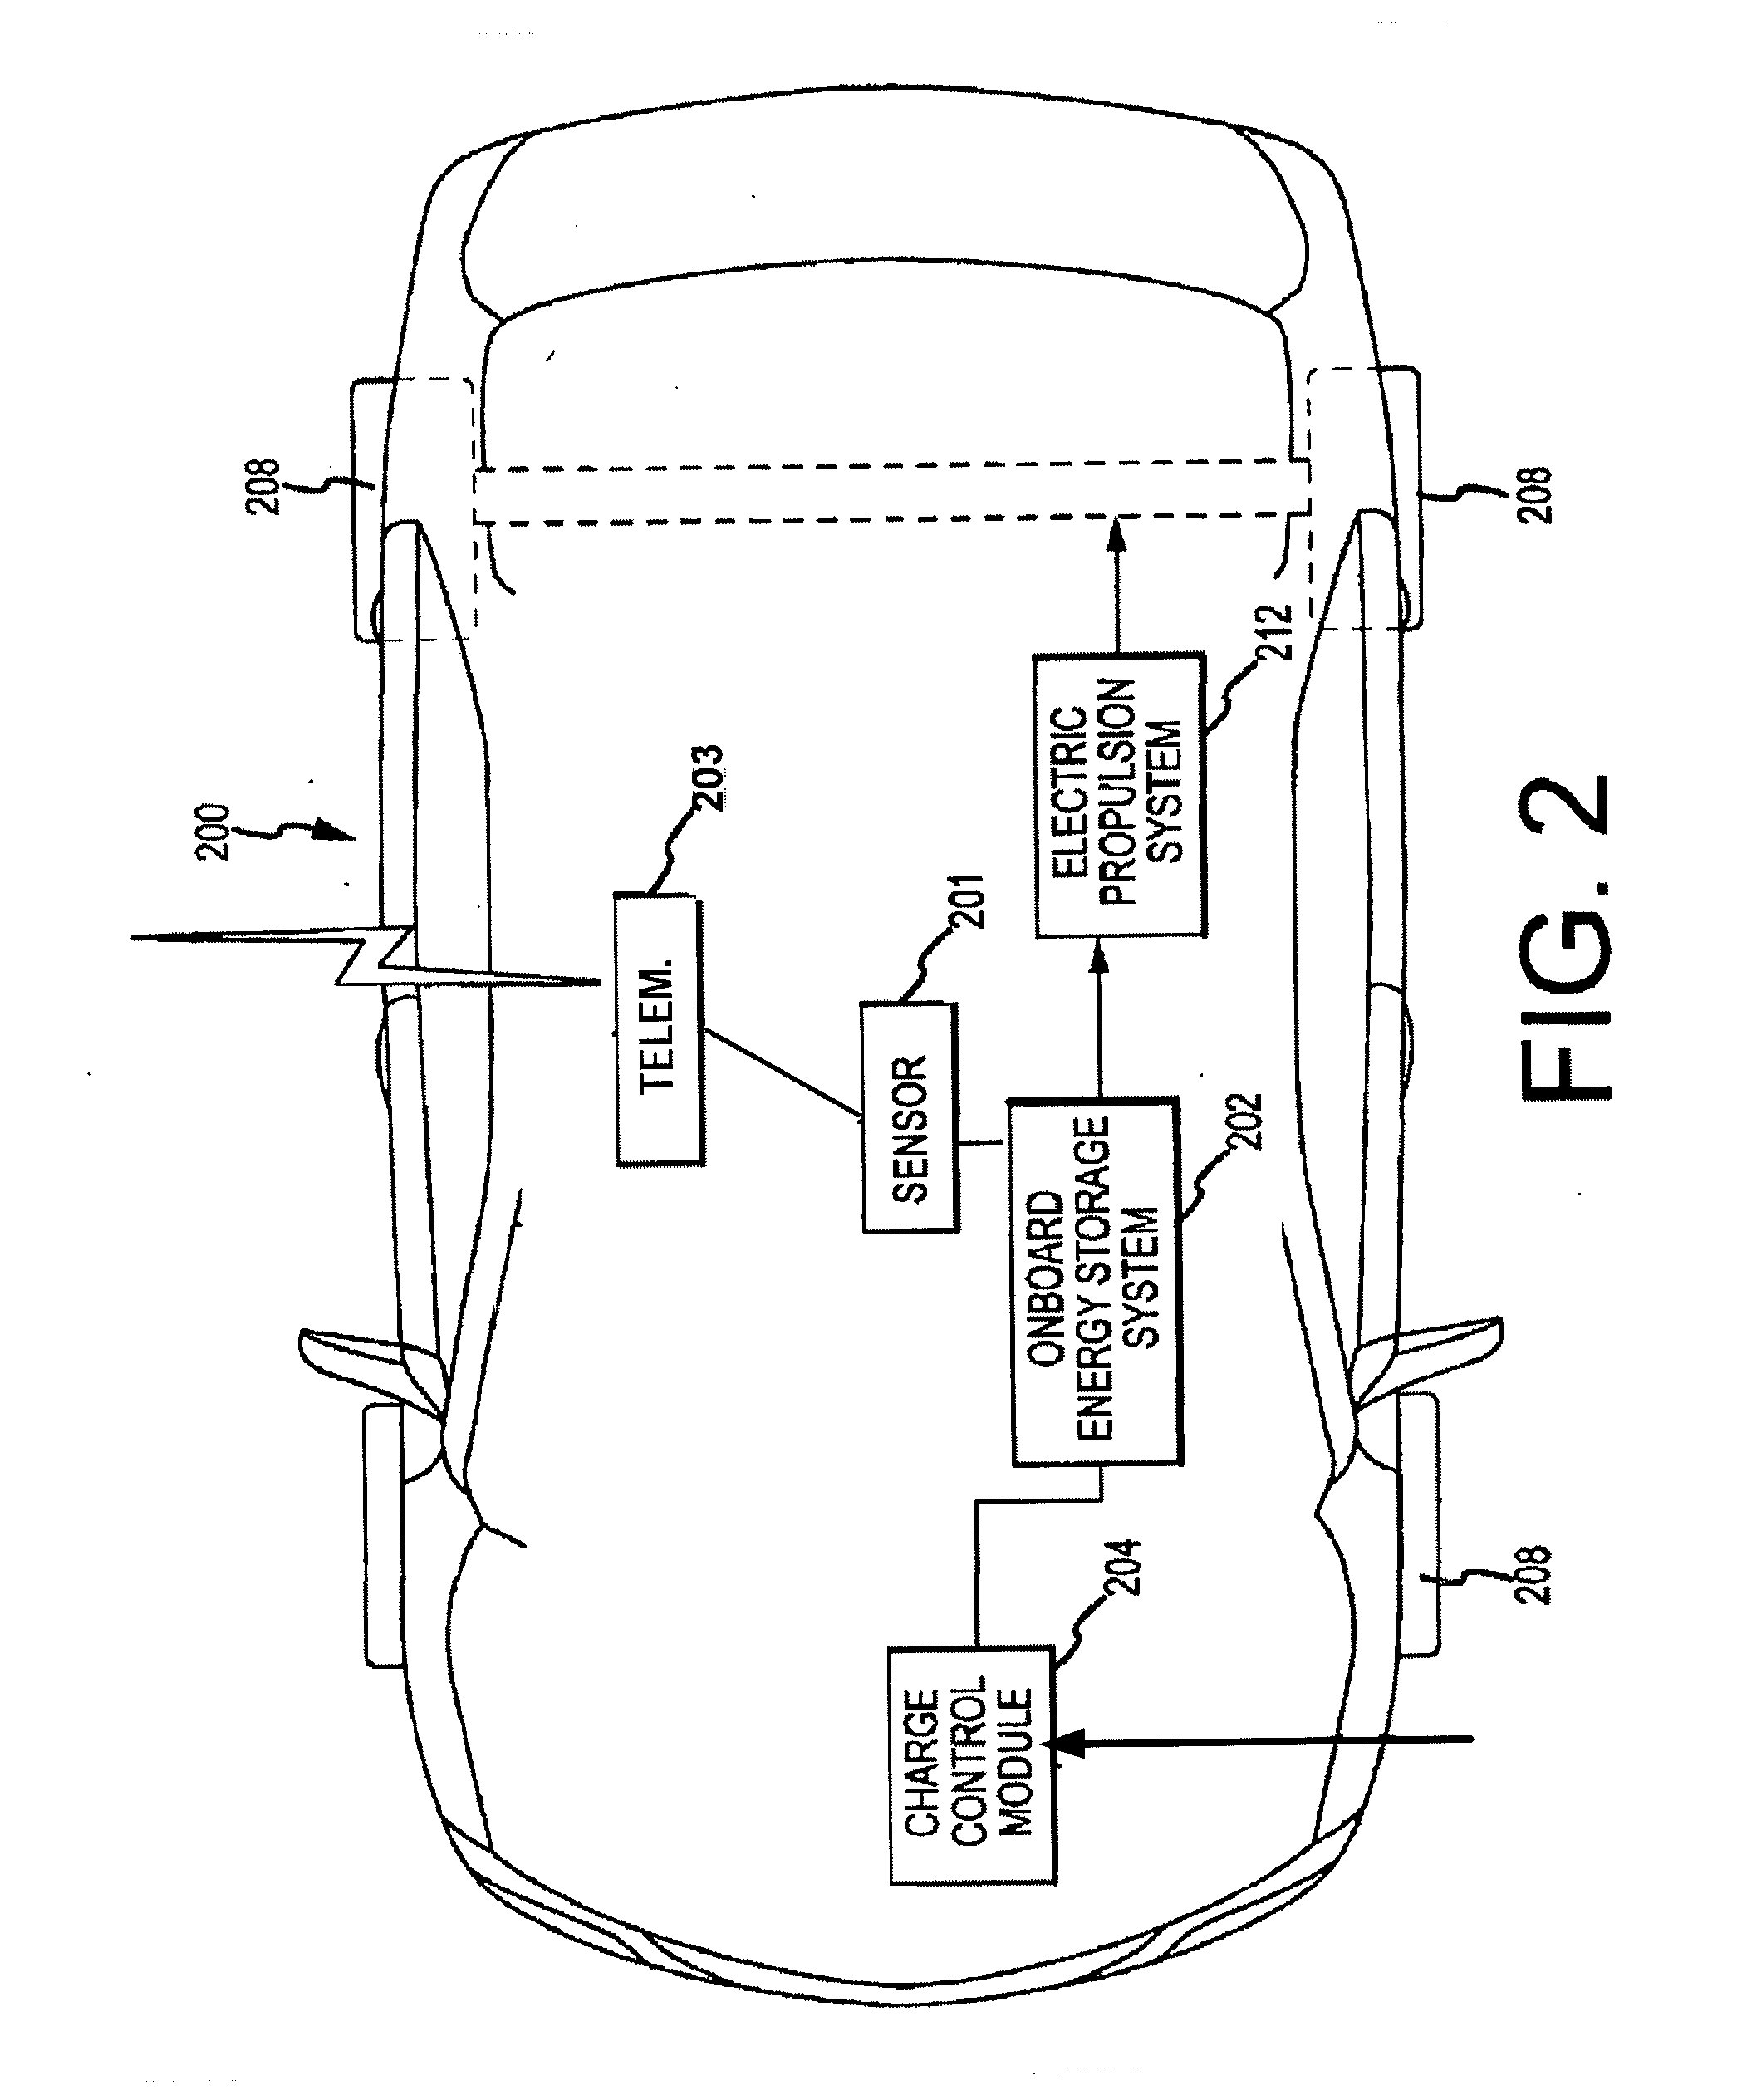 Charge Notification Method for Extended Range Electric Vehicles